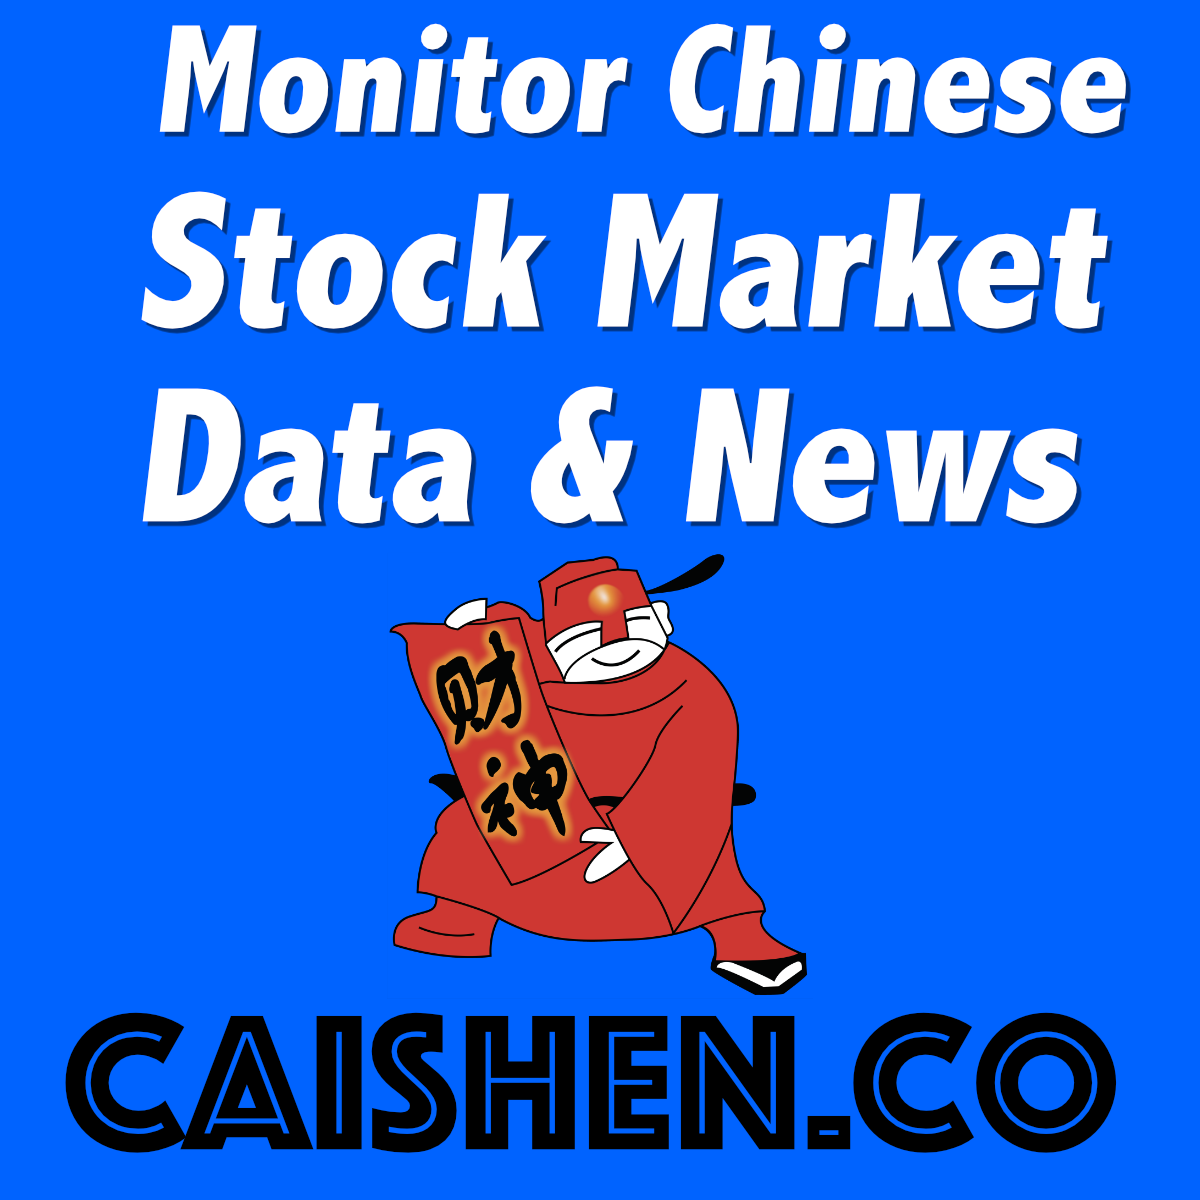 Caishen.Co - Primary Data for China Secondary Investment and Stock Markets